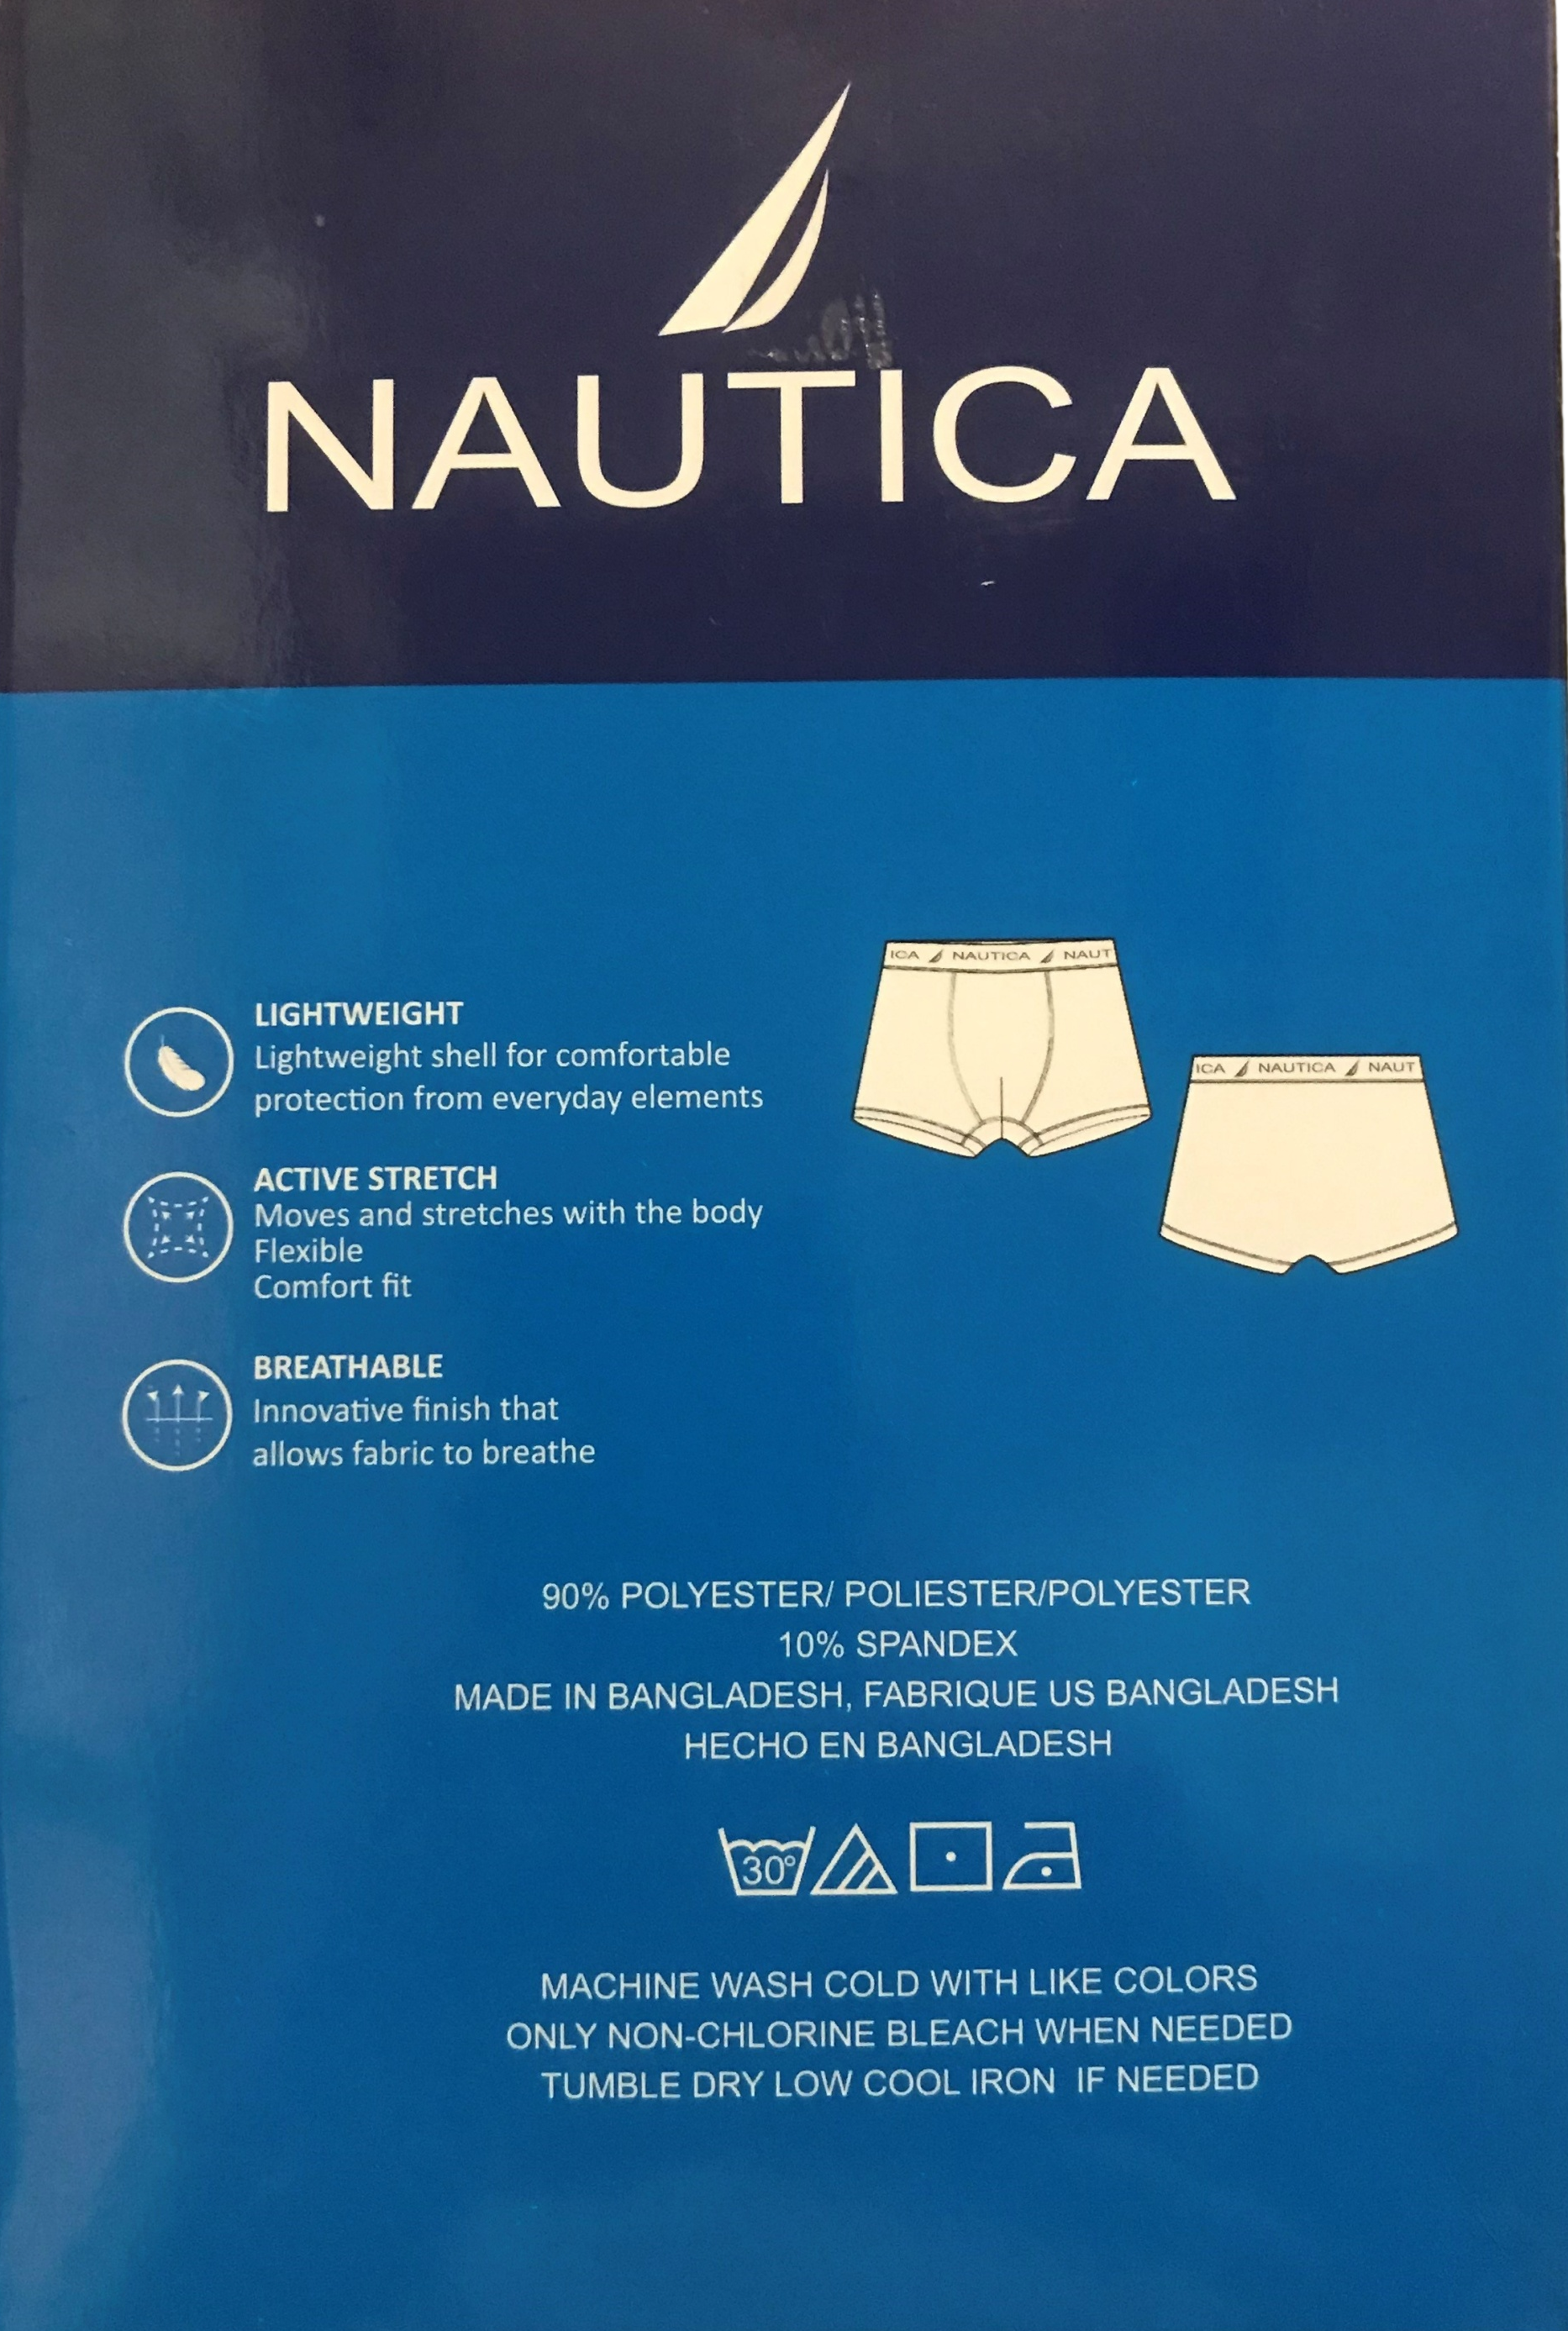 Men's Nautica Low Rise Hipster Trunks Boxer Shorts Briefs 3 Pack